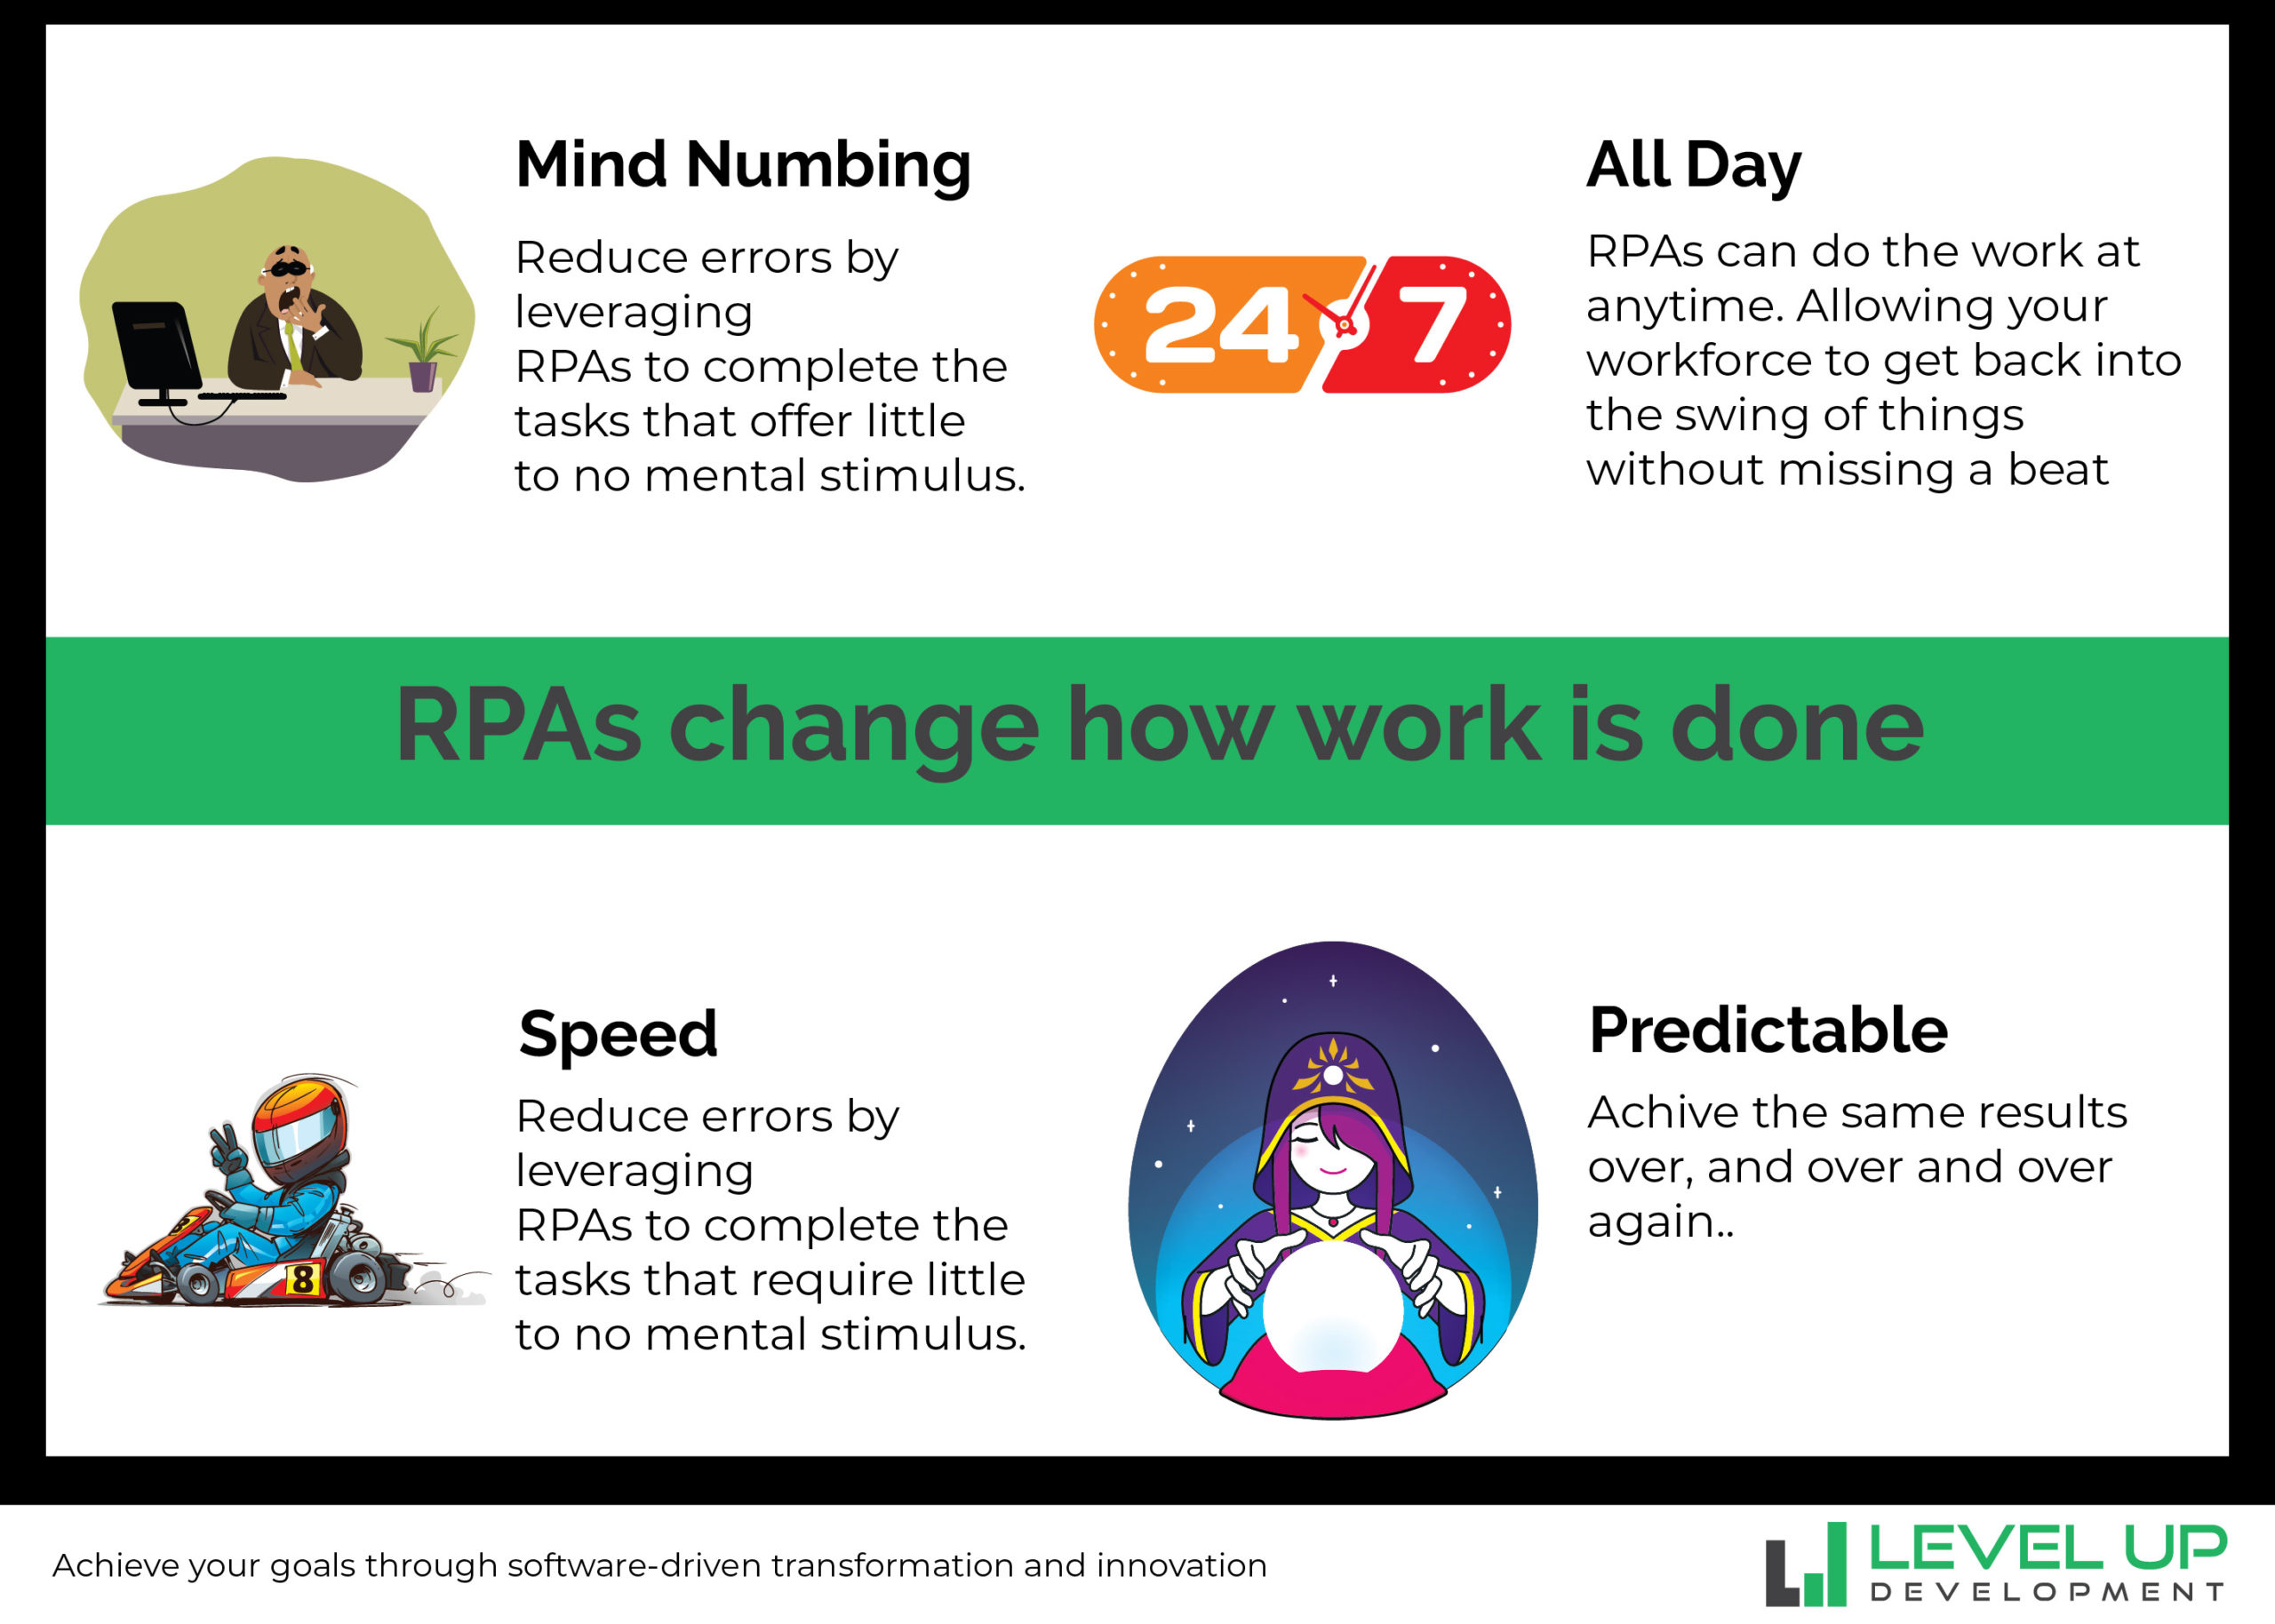 How Robotic Process Automation (RPA) is Optimizing Remote Workforces